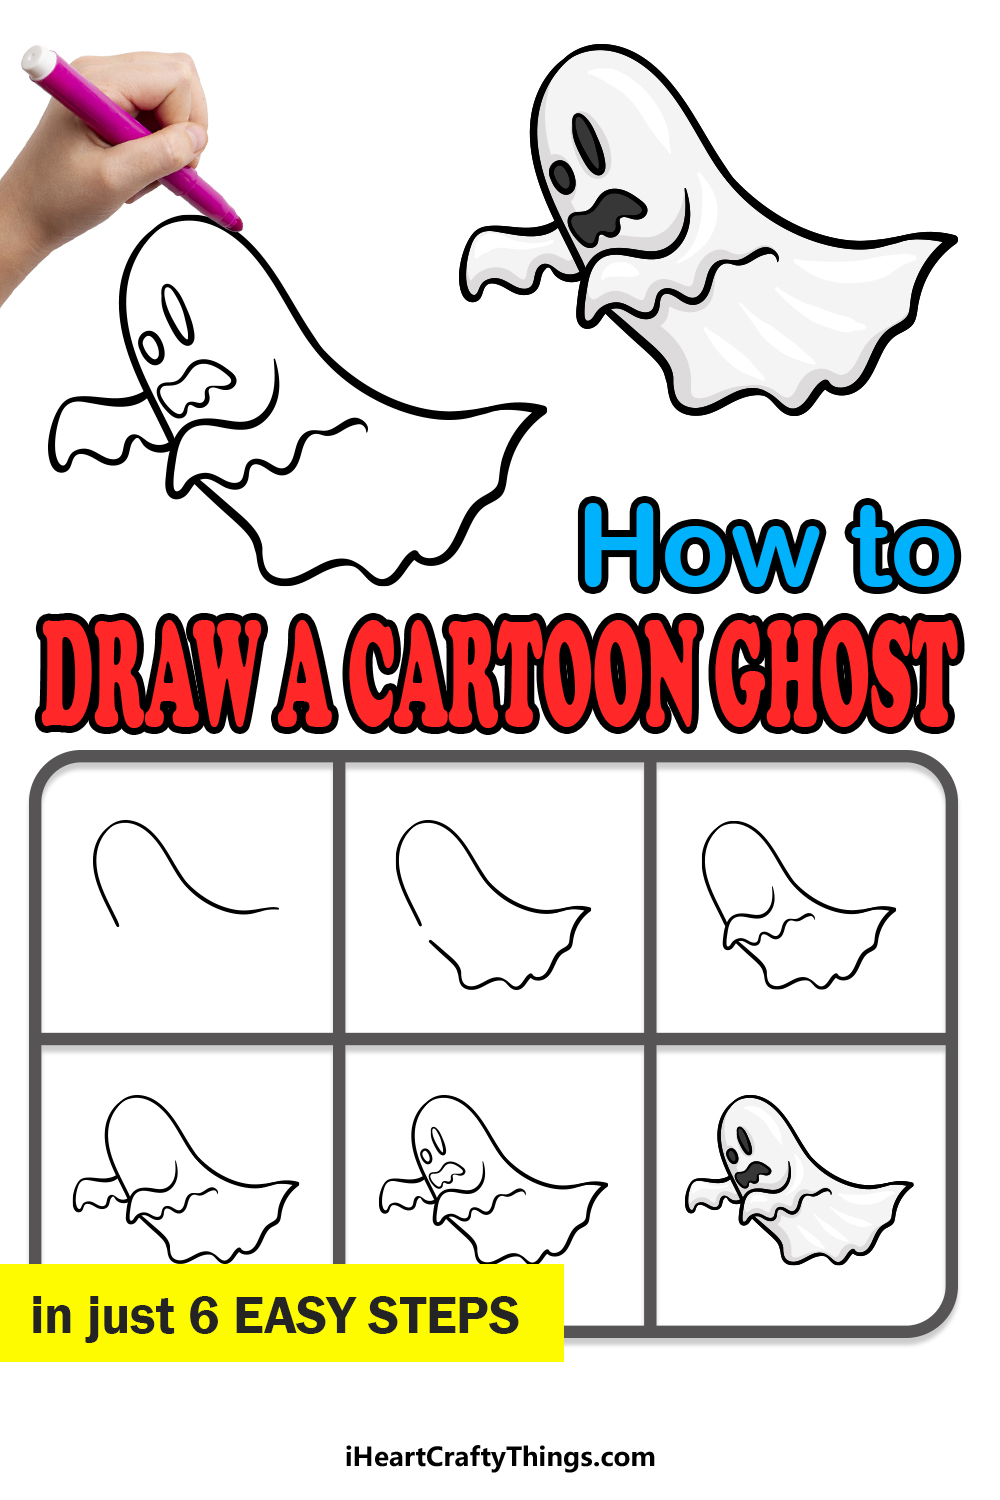 how to draw a cartoon ghost in 6 easy steps